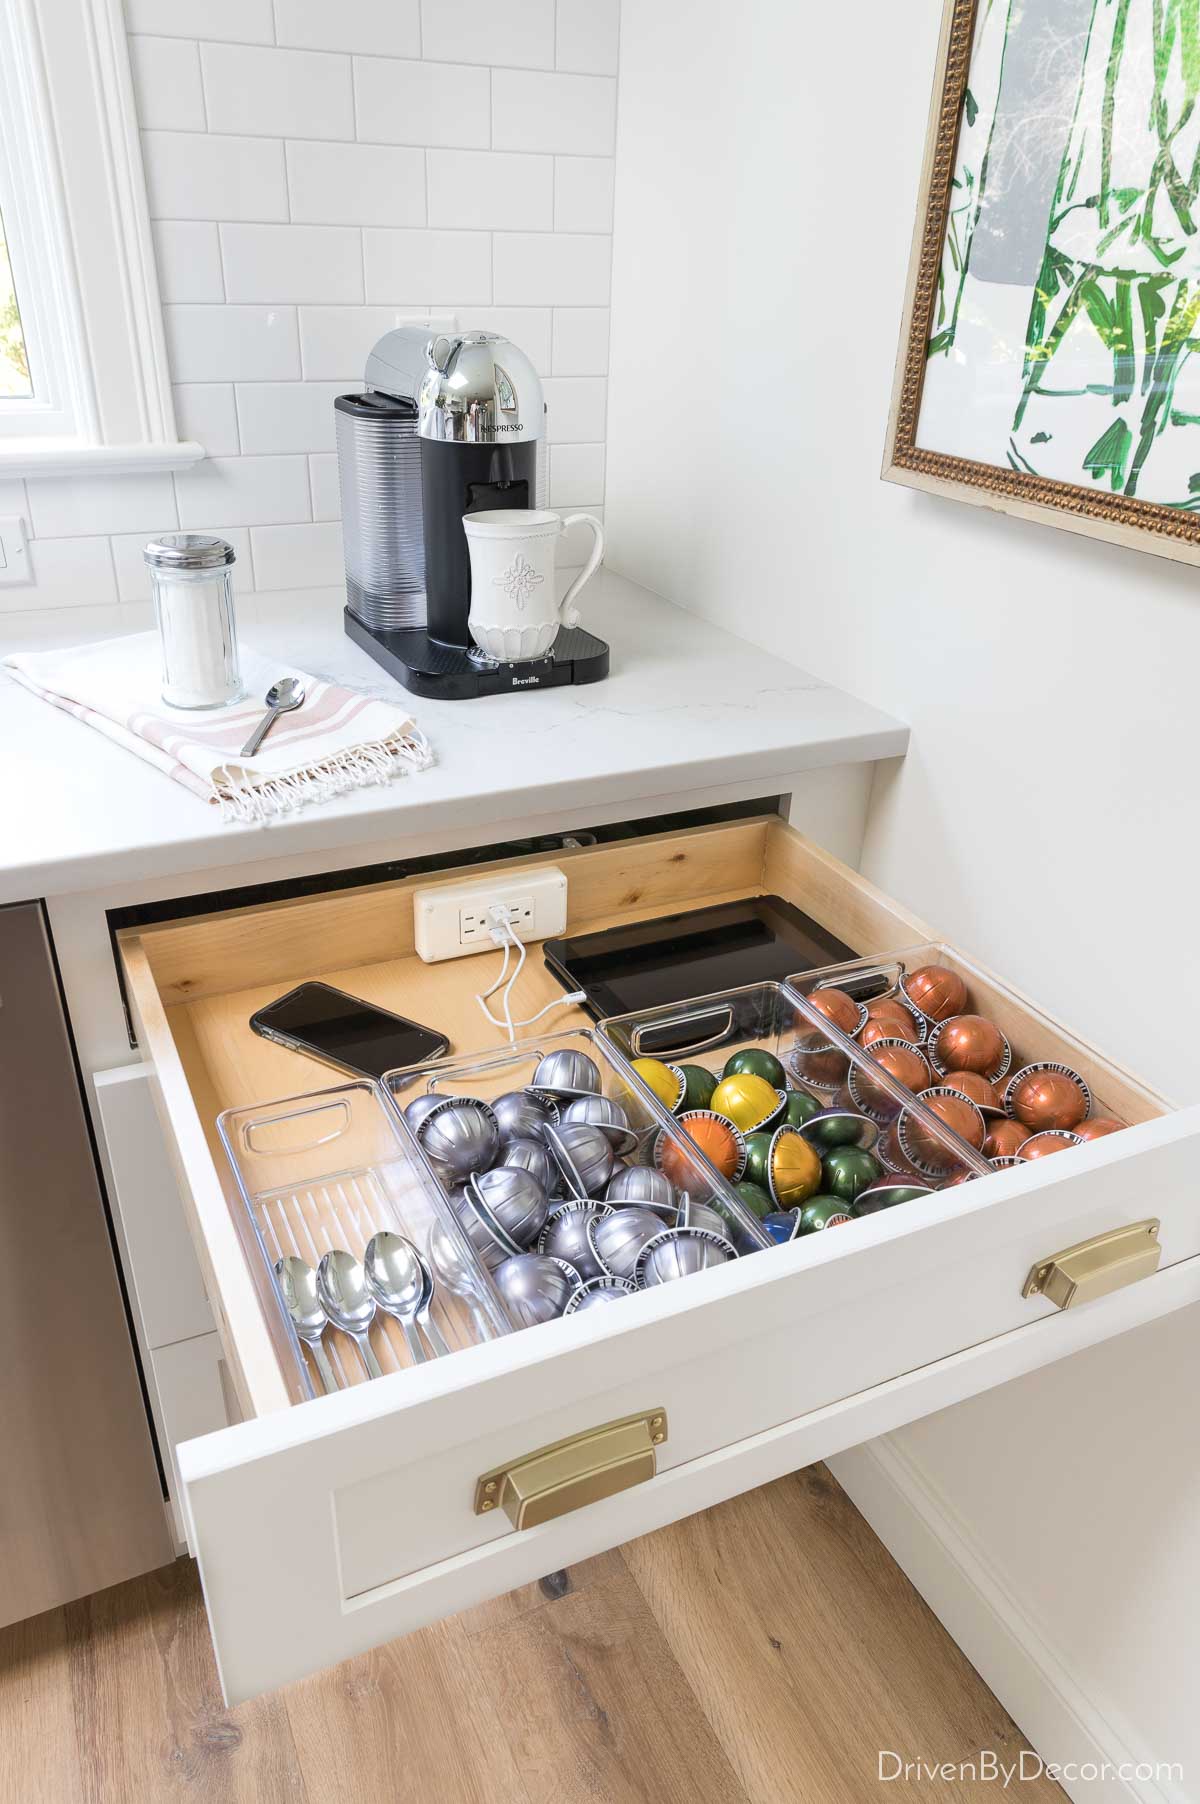 Kitchen drawer with coffee pods & built-in charger for charging electronics - love this kitchen remodel idea!